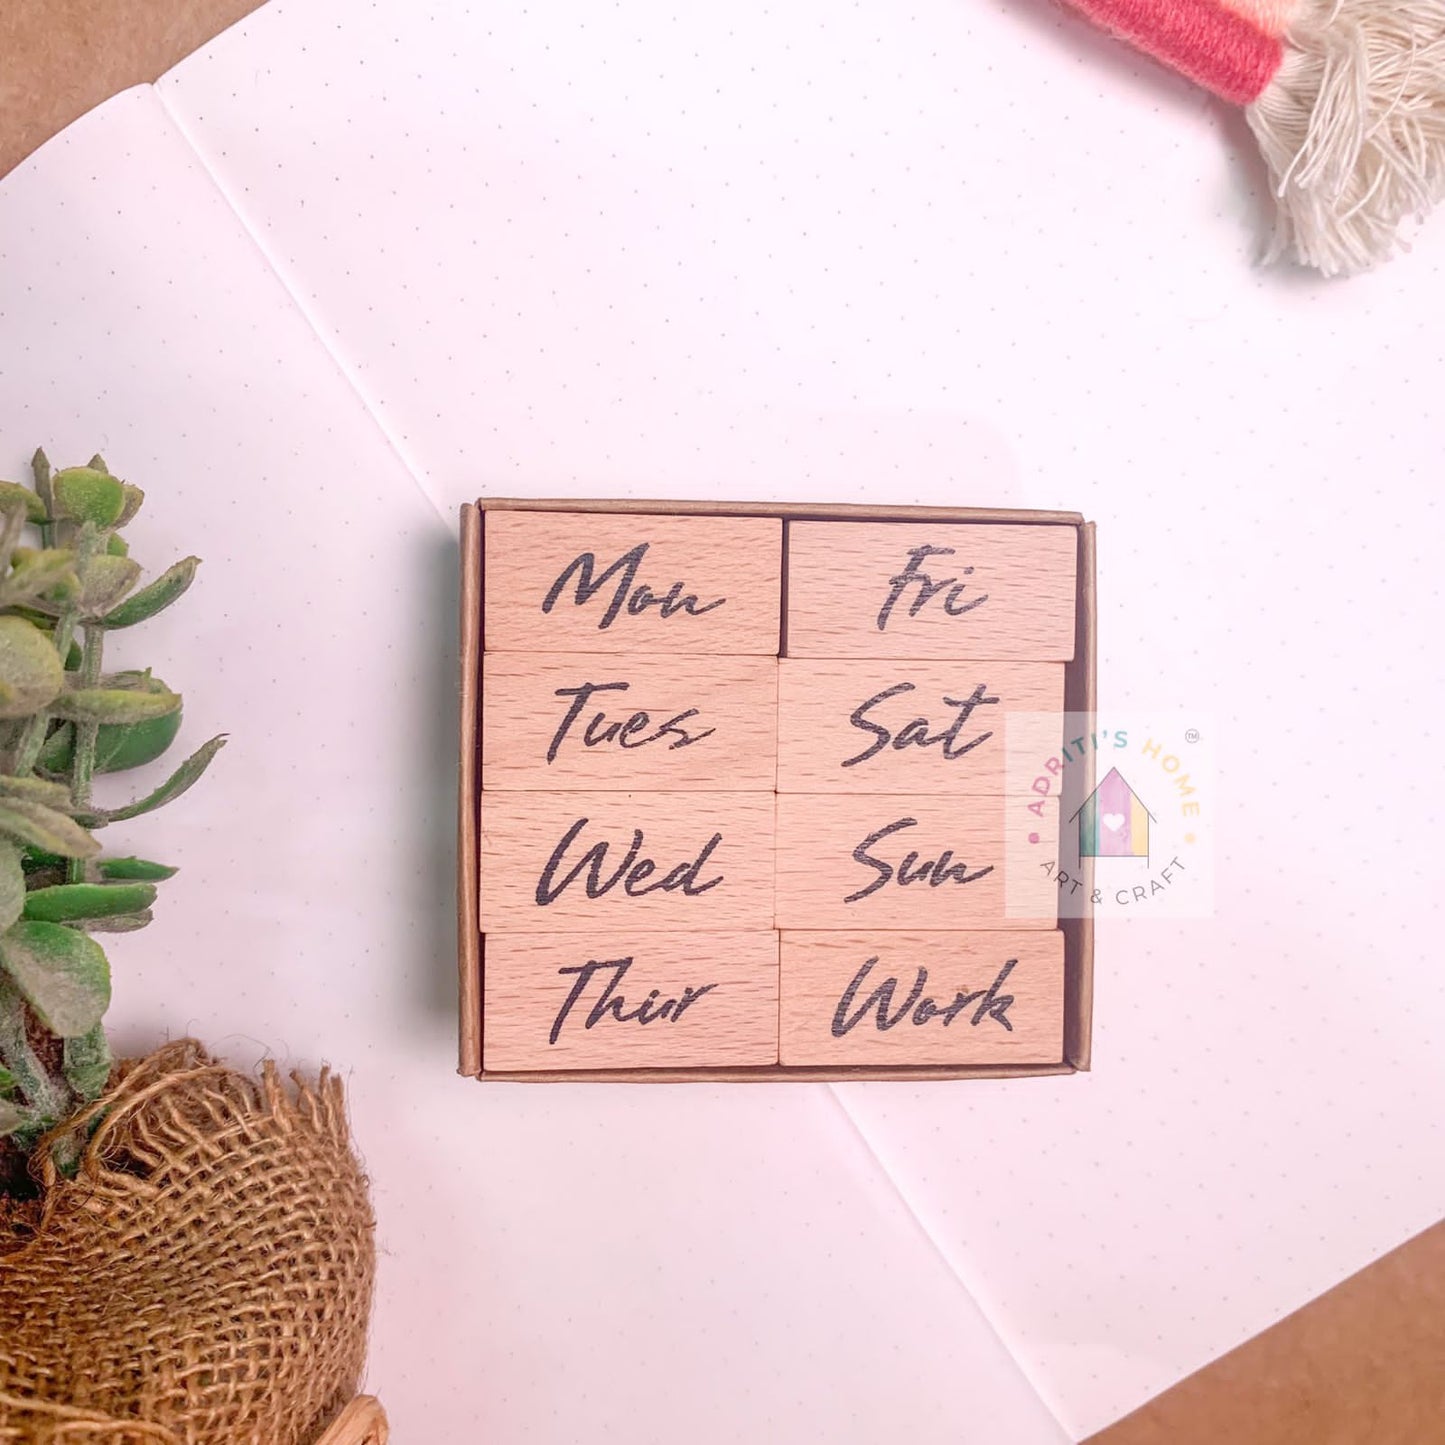 Days of Week Wooden Stamp 8 Pcs ( stamp Size : 3.3x1.5x2.5 CM)